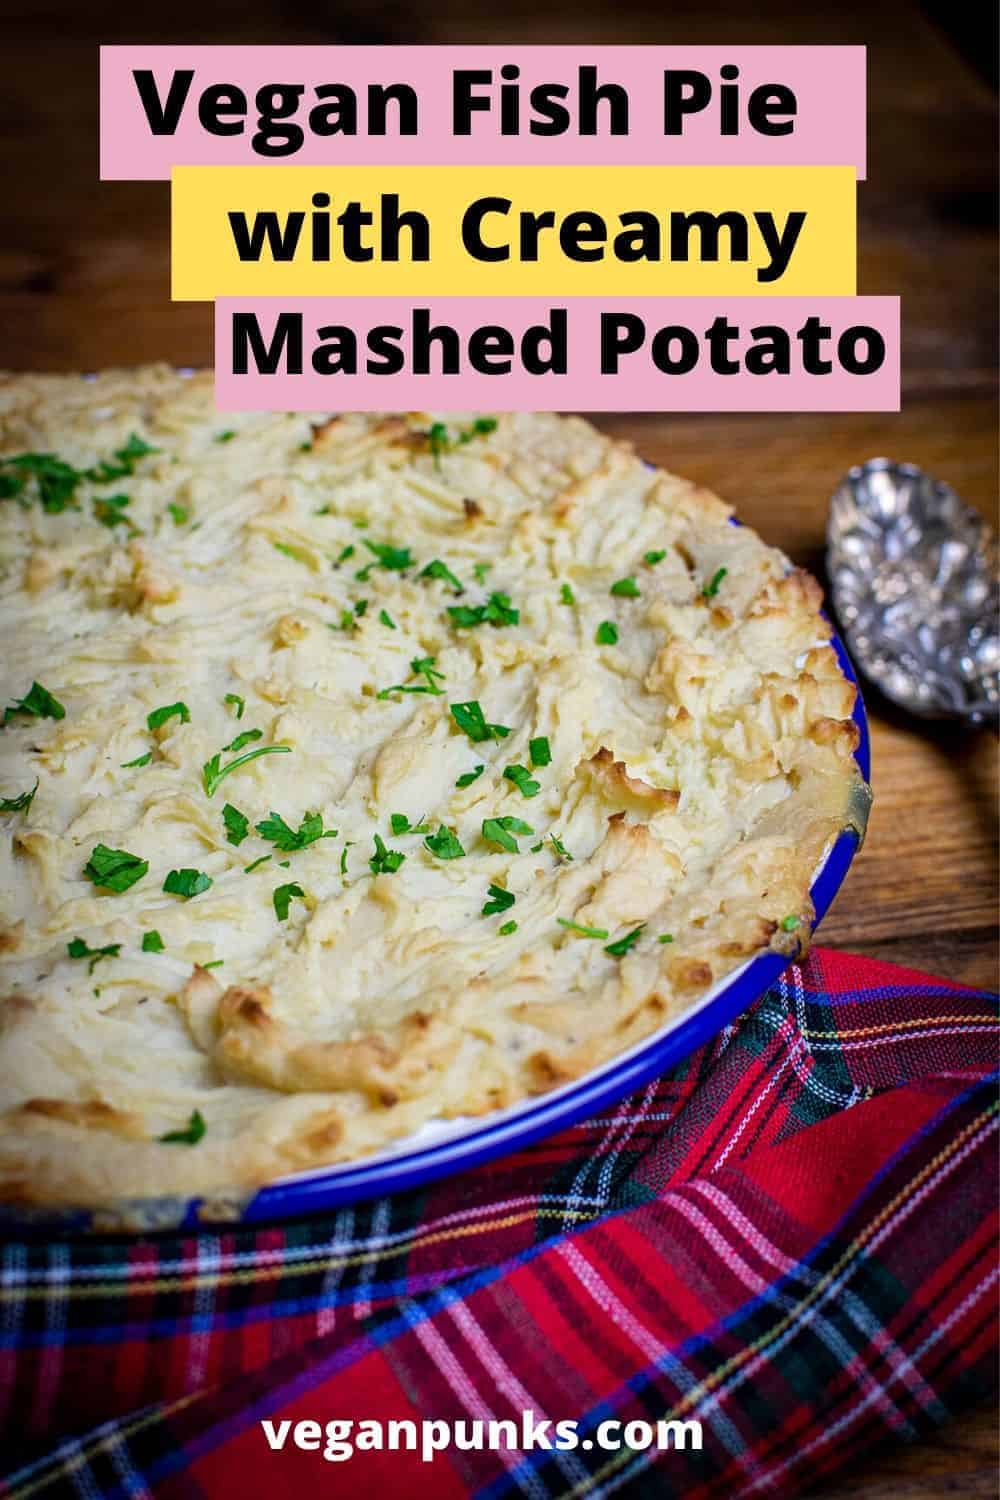 An image of vegan fish pie for Pinterest with the words 'Vegan Fish Pie with Creamy Mashed Potato'